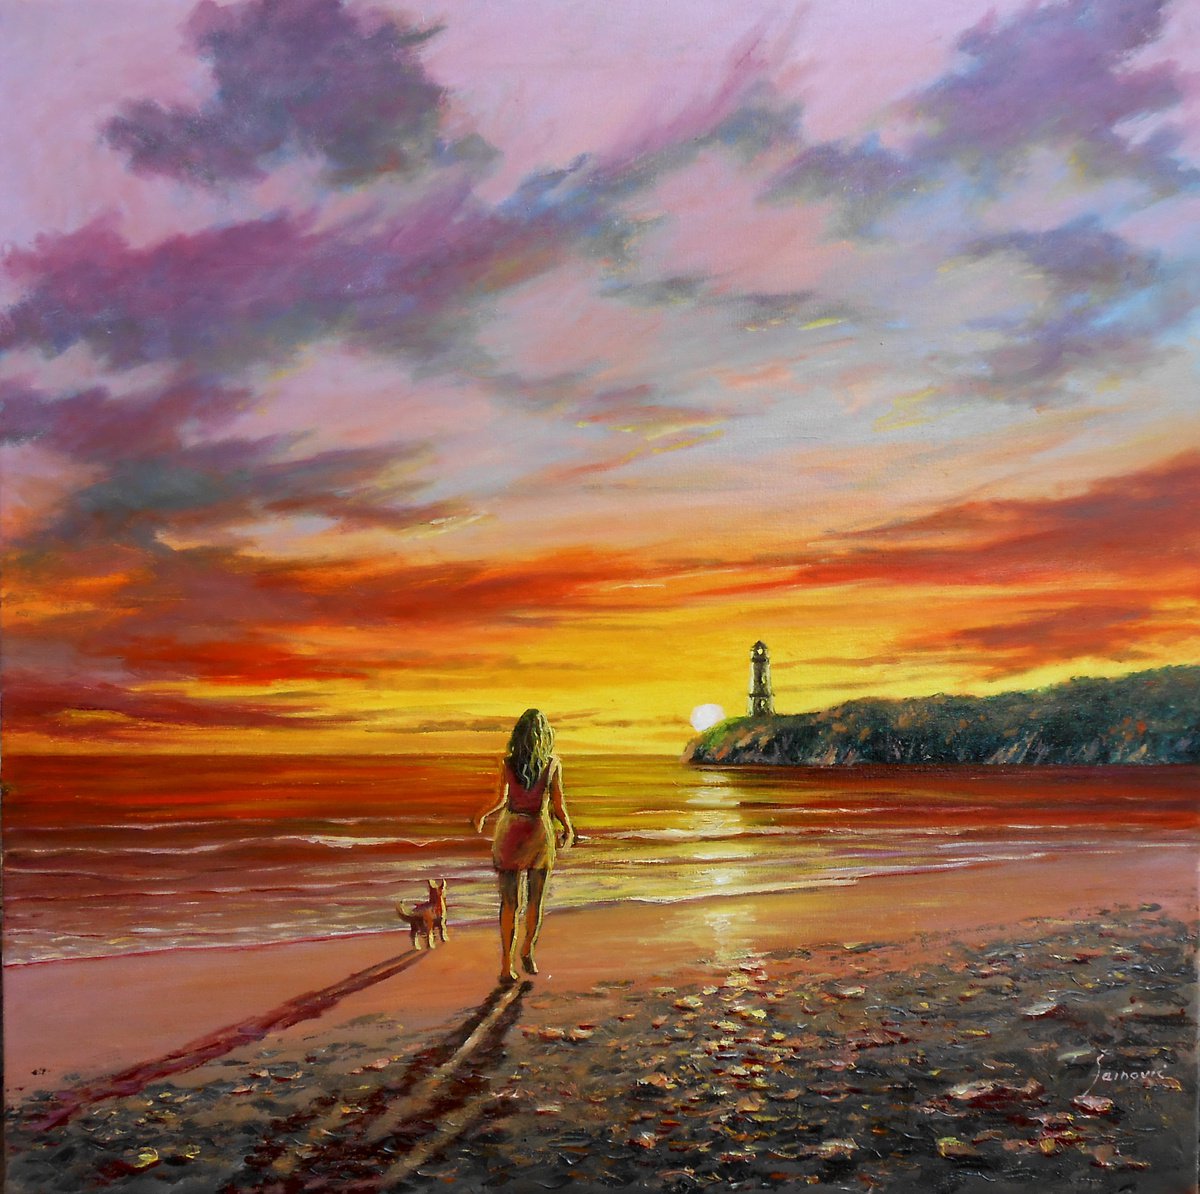 THE MAGIC MOMENTS, OIL ON CANVAS, SPECIAL DISCOUNT, order the same painting by Borko Sainovic